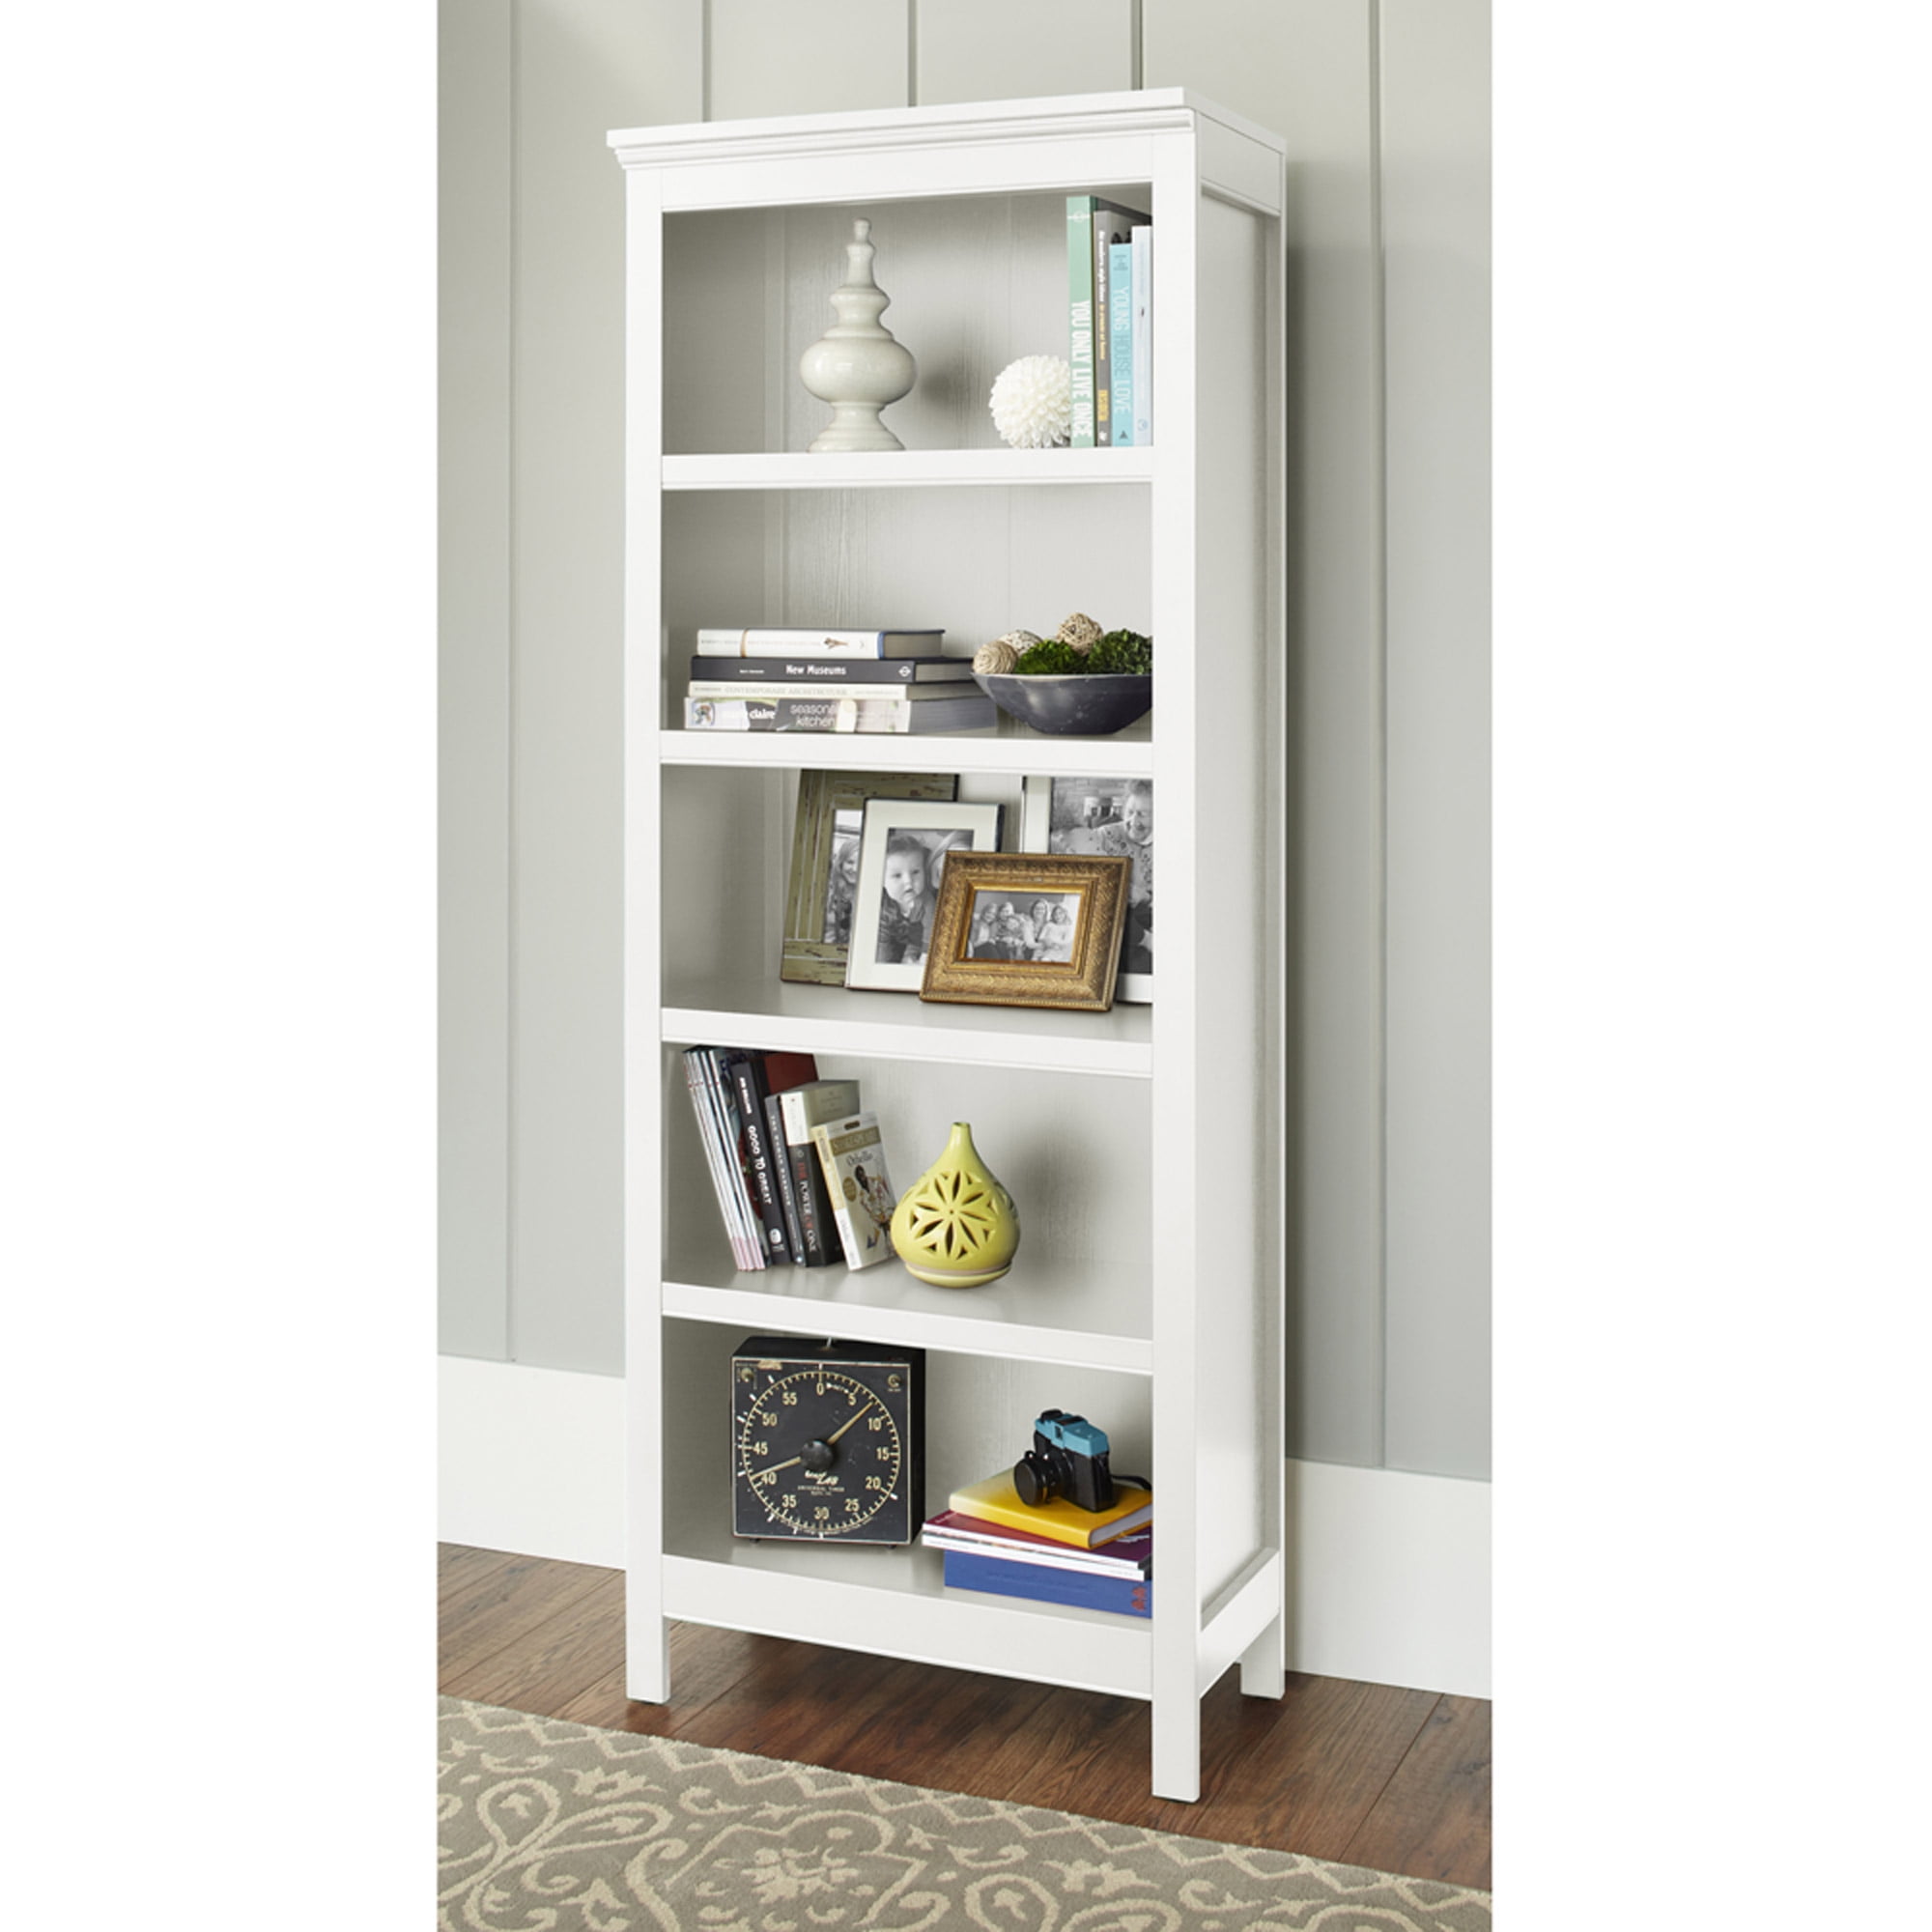 Creatice White 2 Shelf Bookcase for Large Space